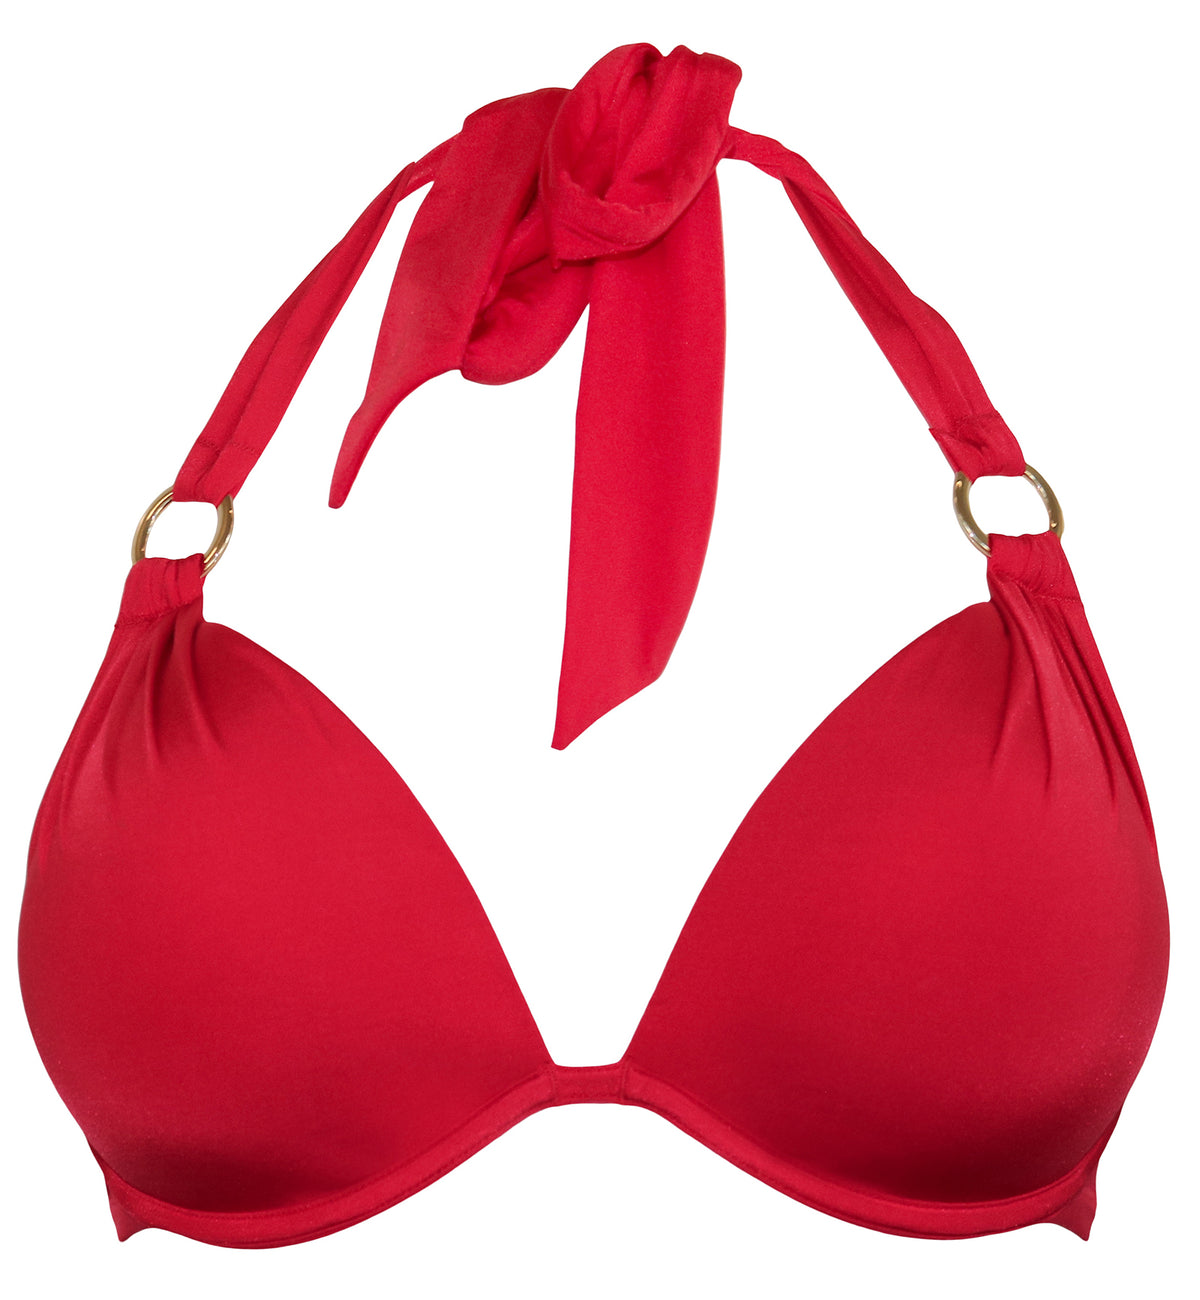 Pour Moi Samoa Boost Halter Padded Underwire Swim Top (20910),32C,Red - Red,32C